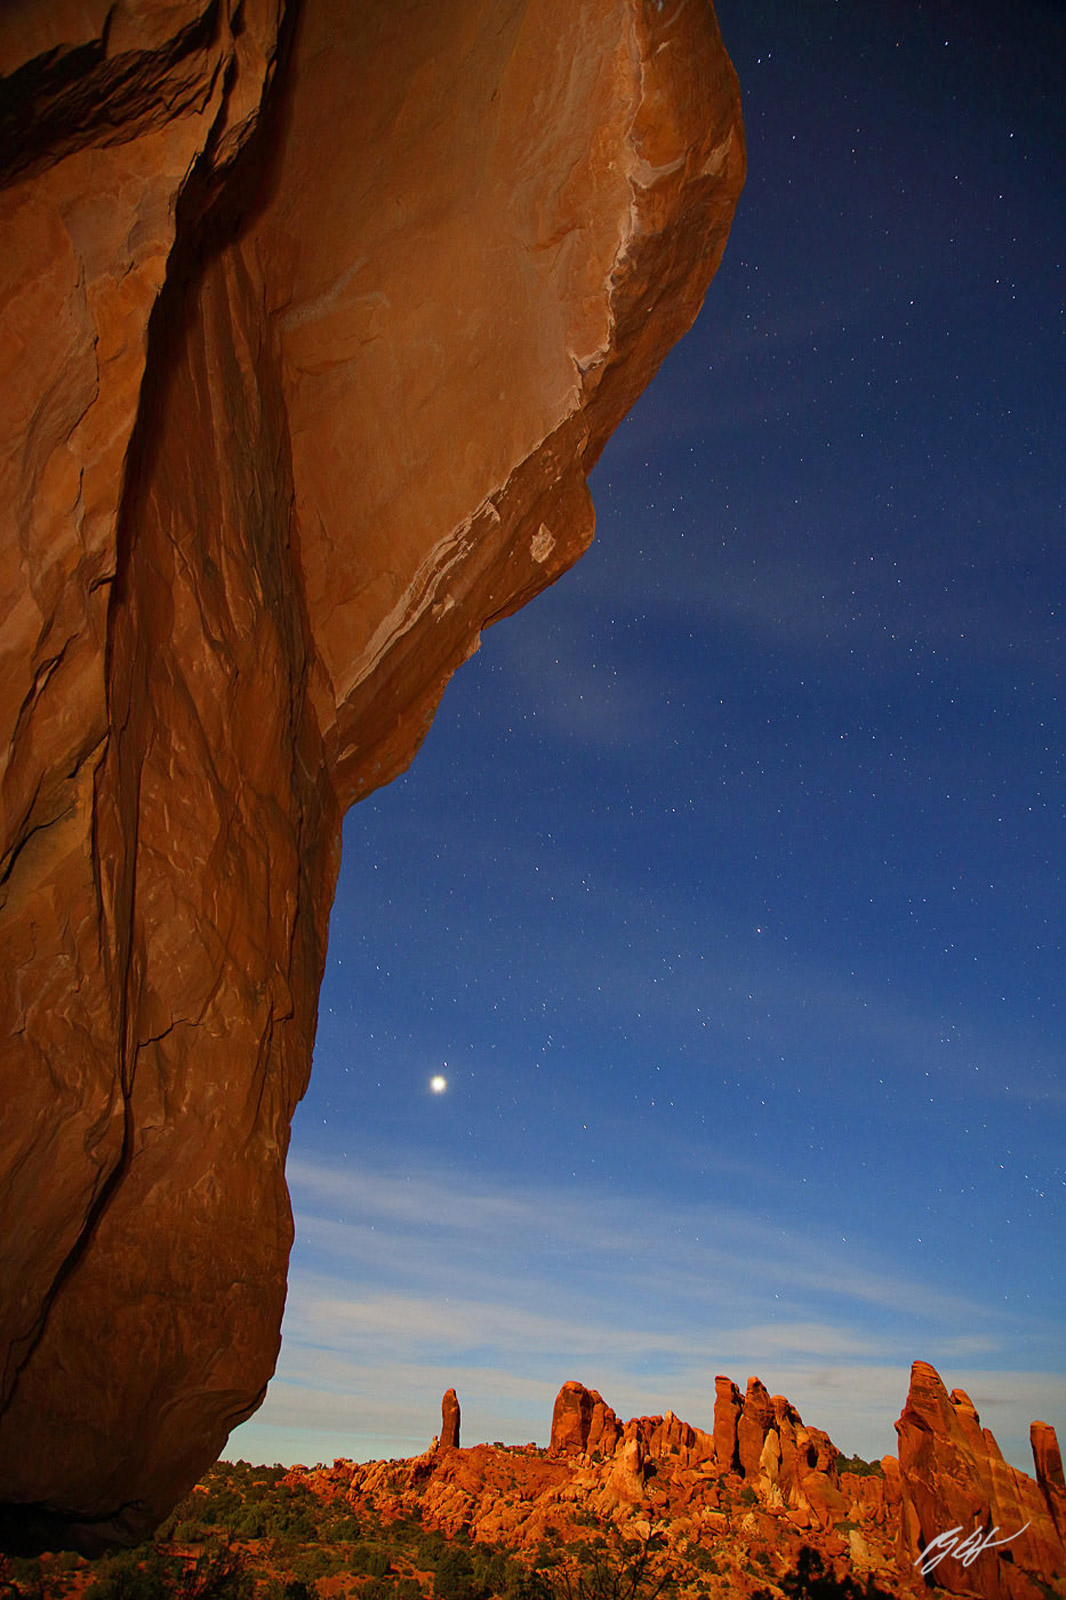 A Super Moon Lights up the Desert Through in Arches National Park in Utah